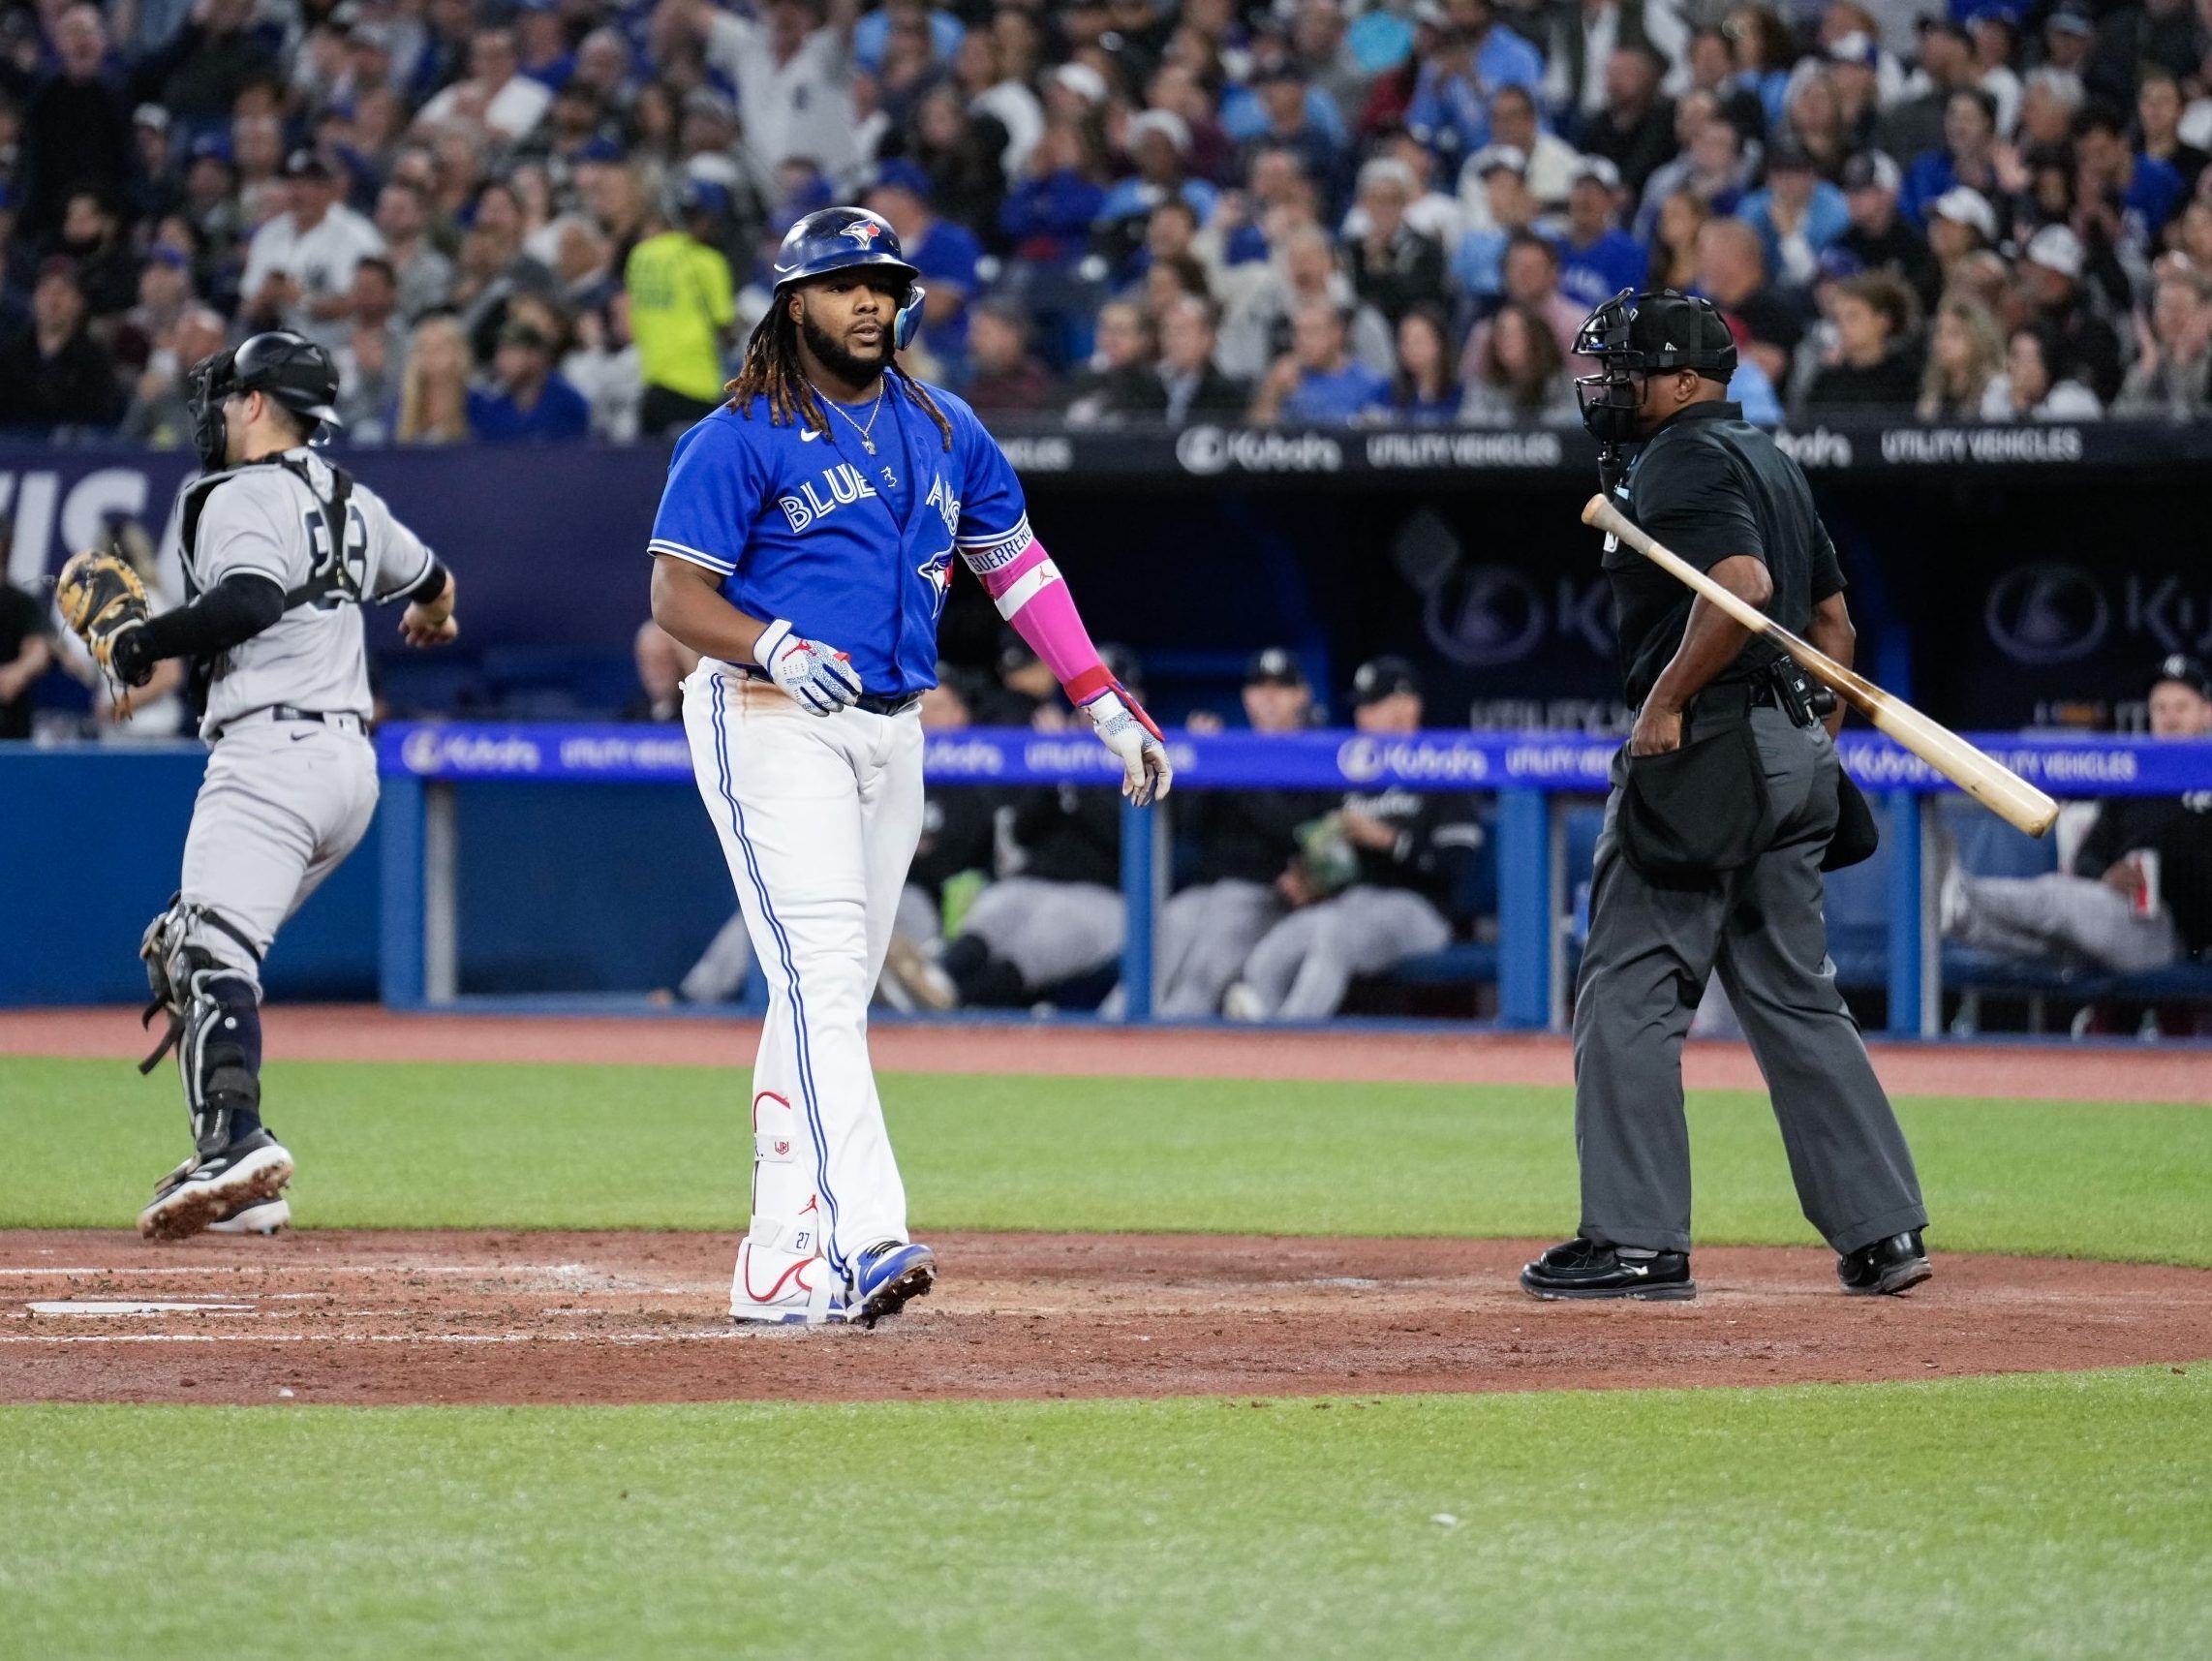 Yankees owned by Vladimir Guerrero Jr. in loss to Blue Jays